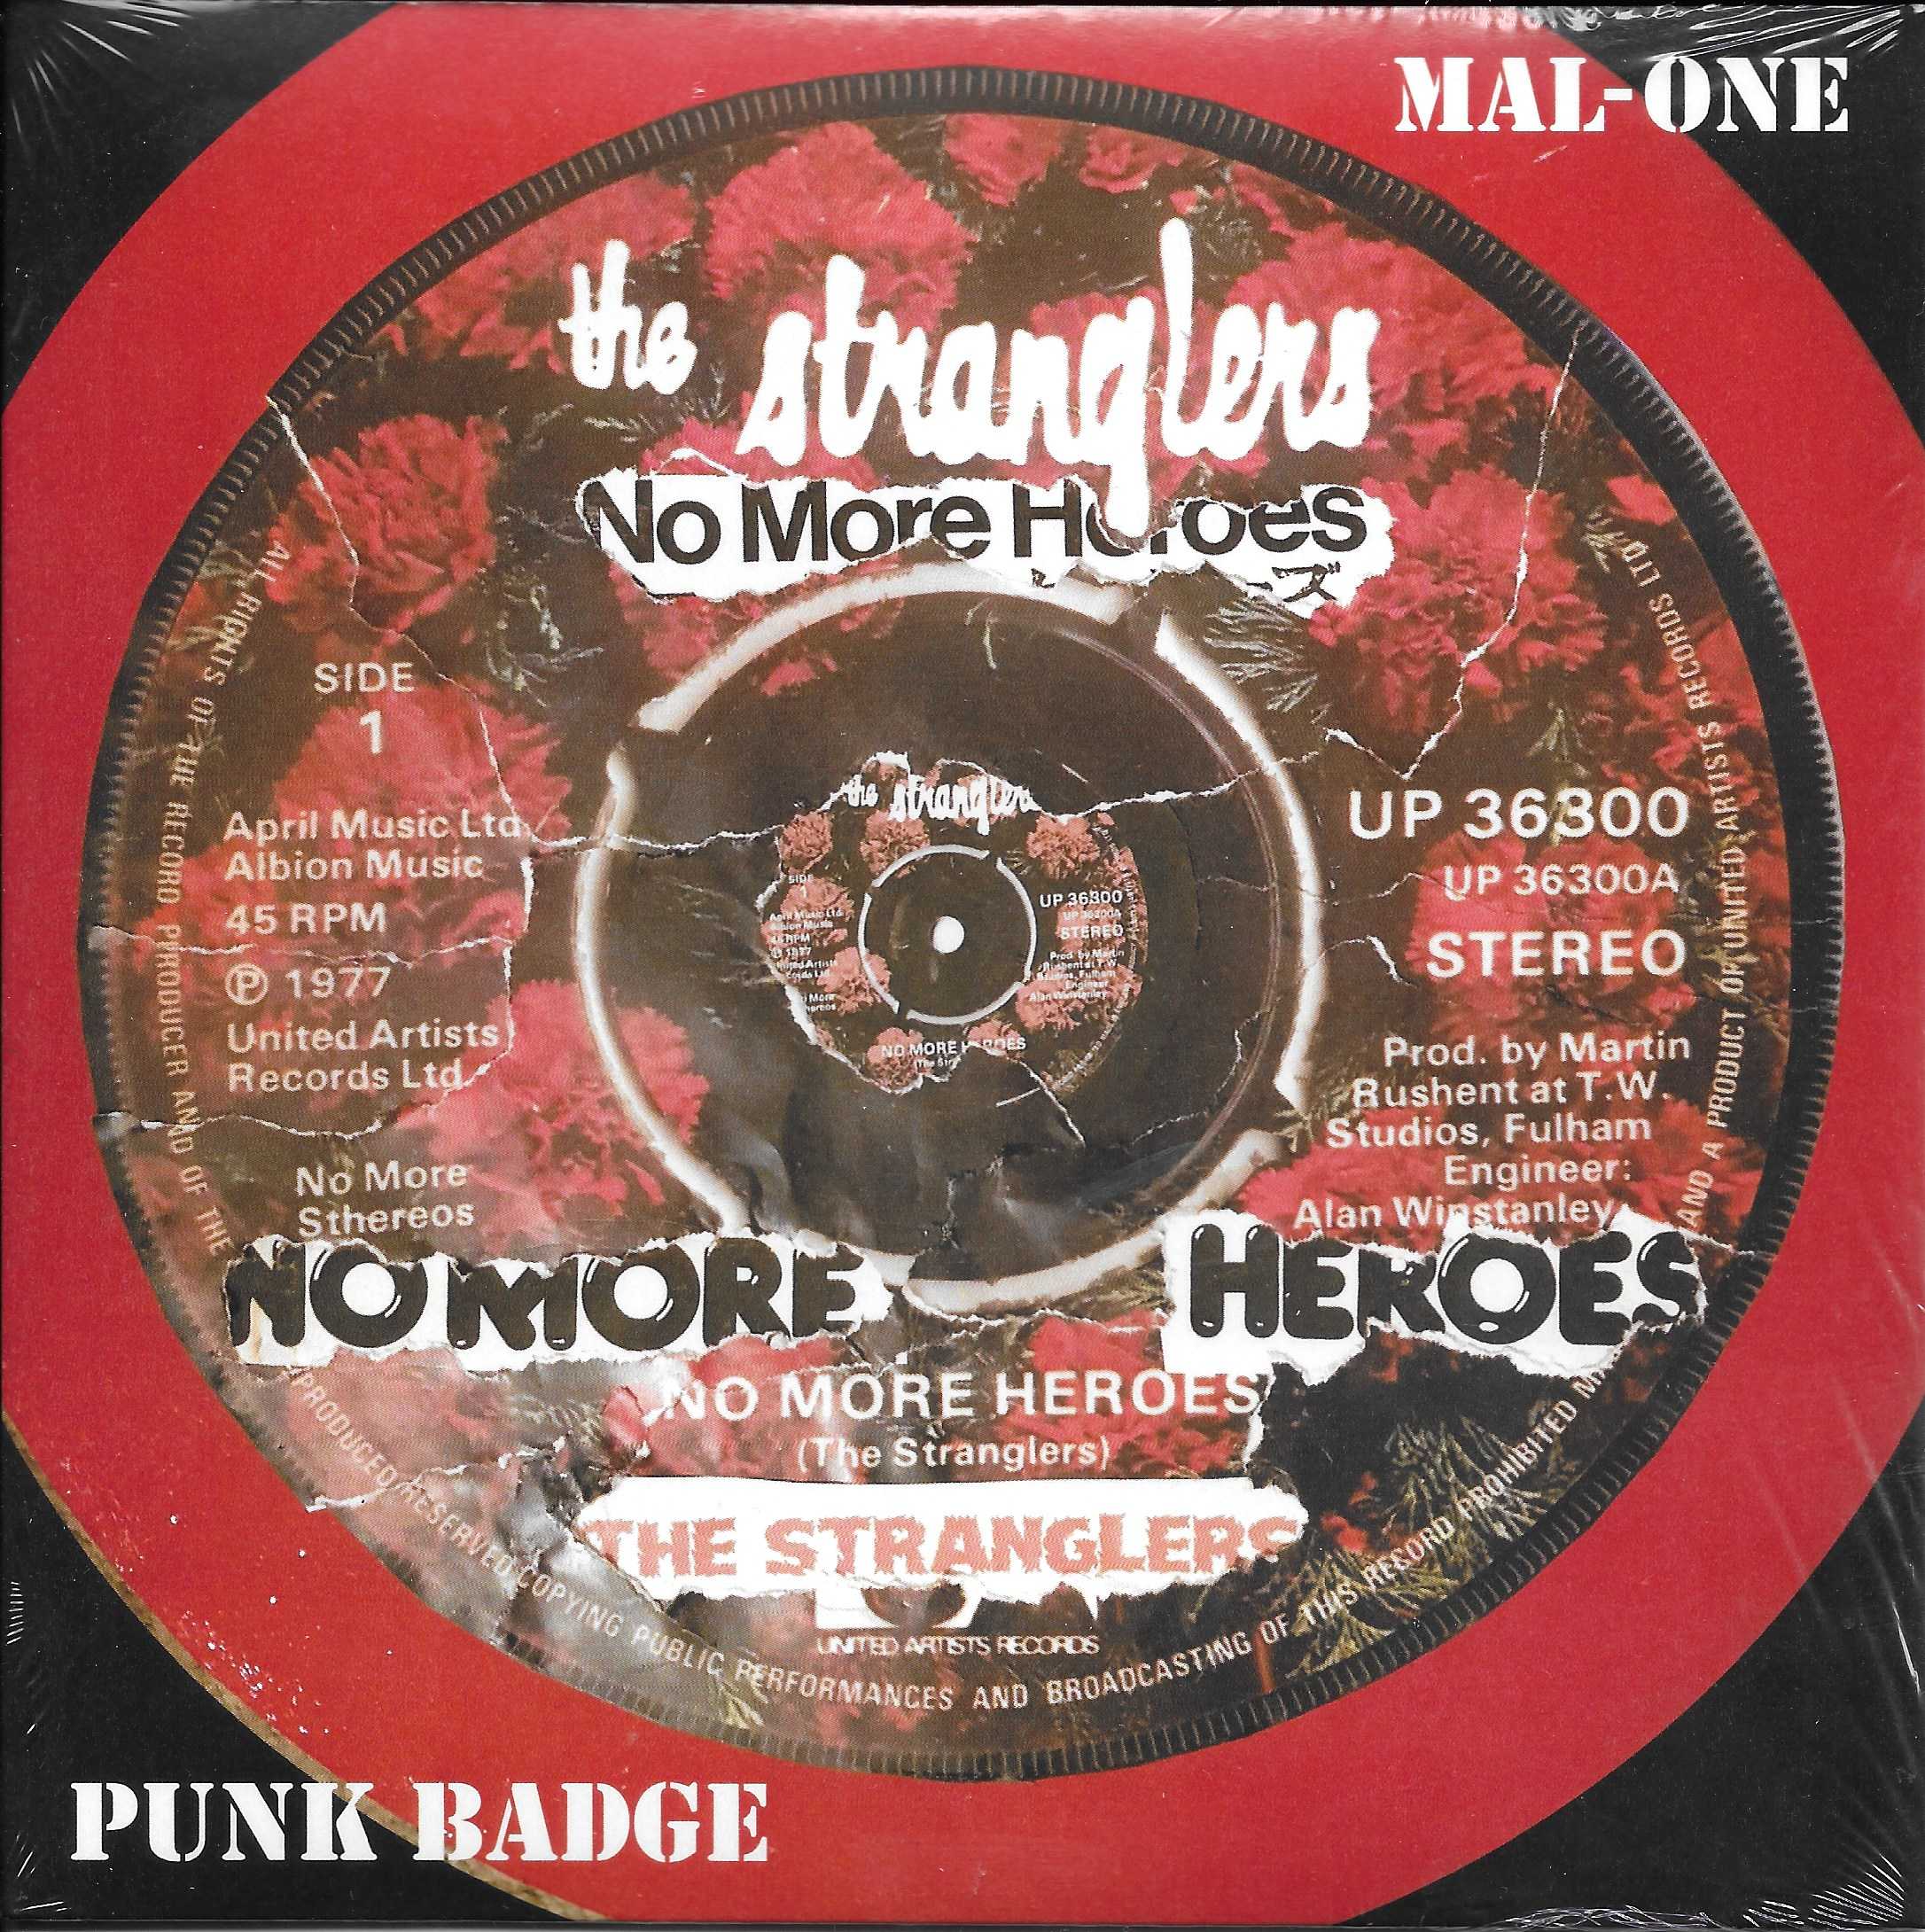 Picture of MAL-ONE-004 6 No more heroes - Record Store Day 2021 by artist Mal-One